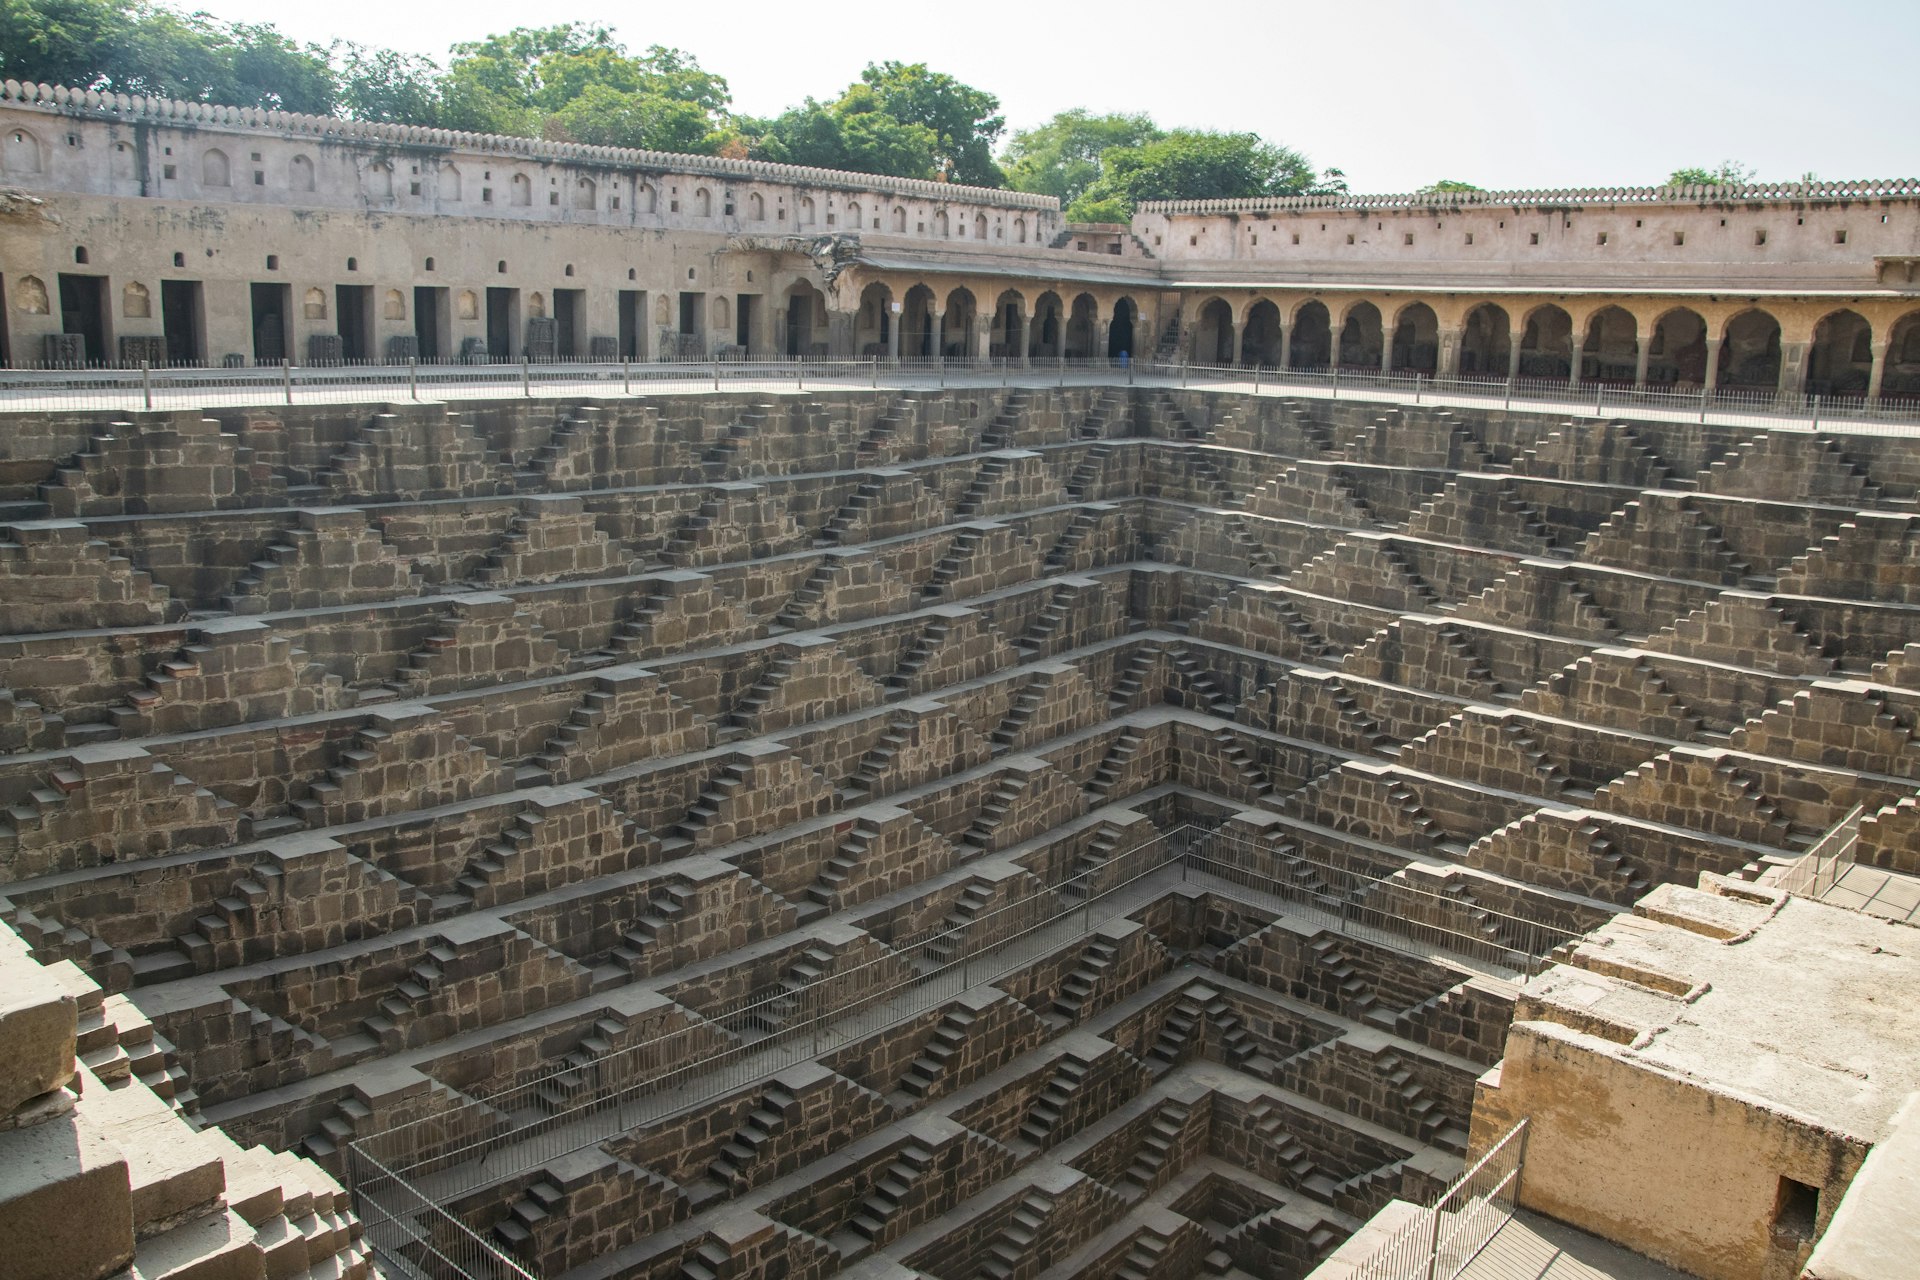 Chand Baori stepwell in Abhaneri, Rajasthan. The stepwell is huge with diagonal steps running down into the well from all sides, with the hole gradually getting smaller in size as it descends.